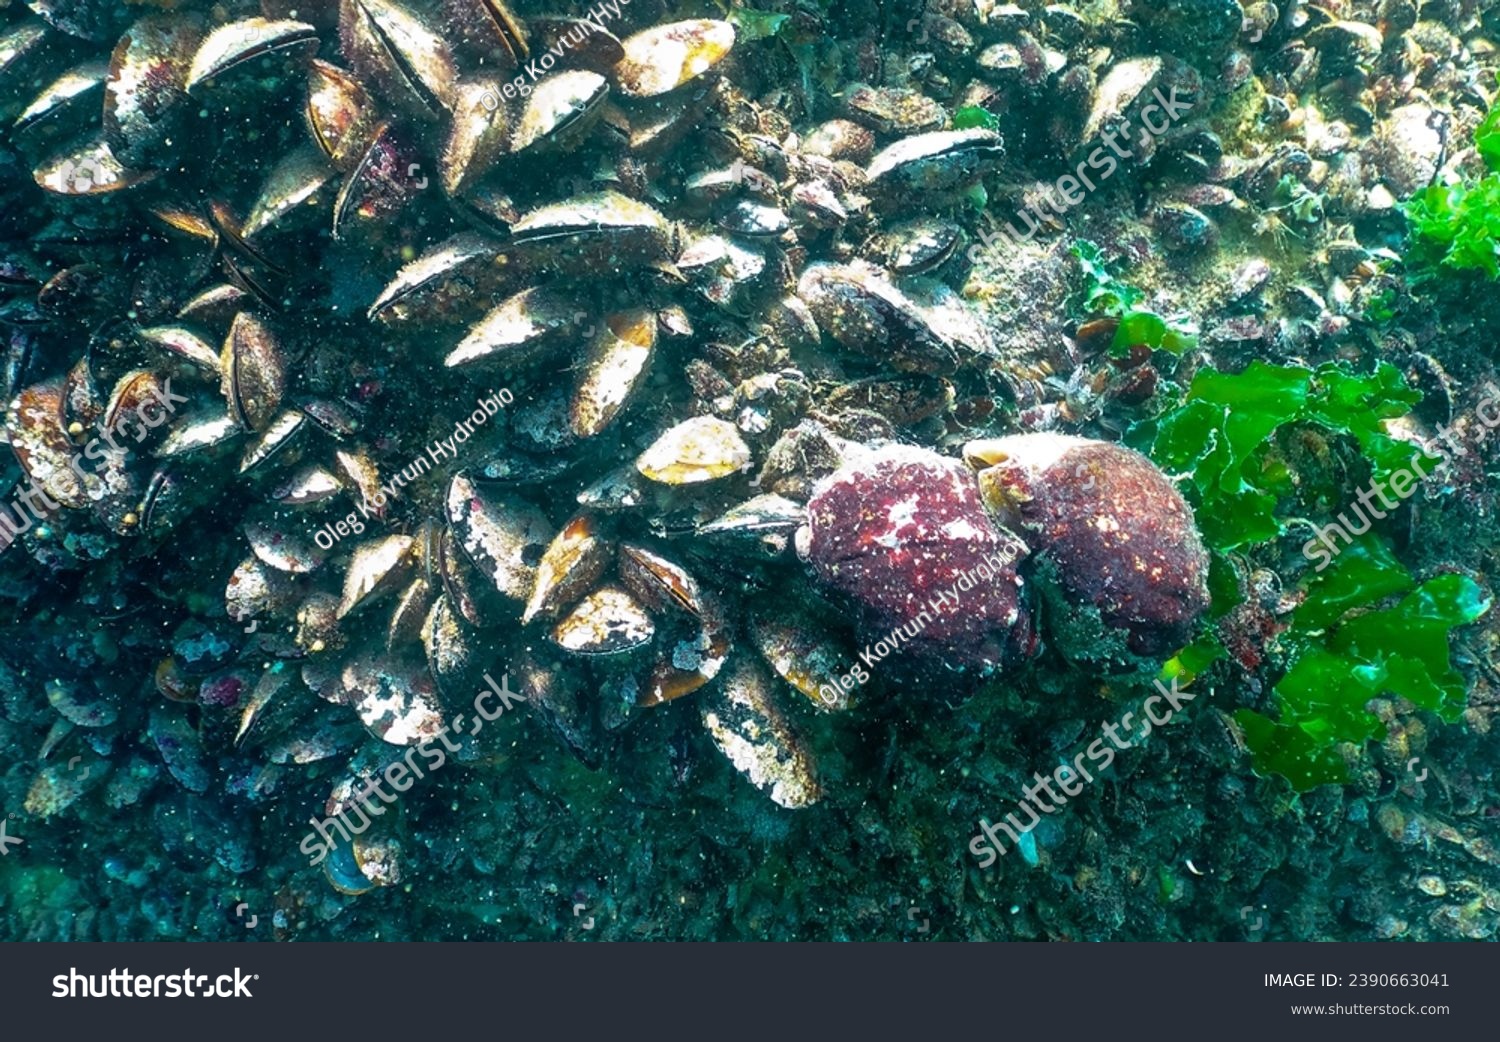 Marine invasive species Veined whelk (Rapana venosa), the mollusk slowly climbs out of the cow and turns it over. Black Sea #2390663041